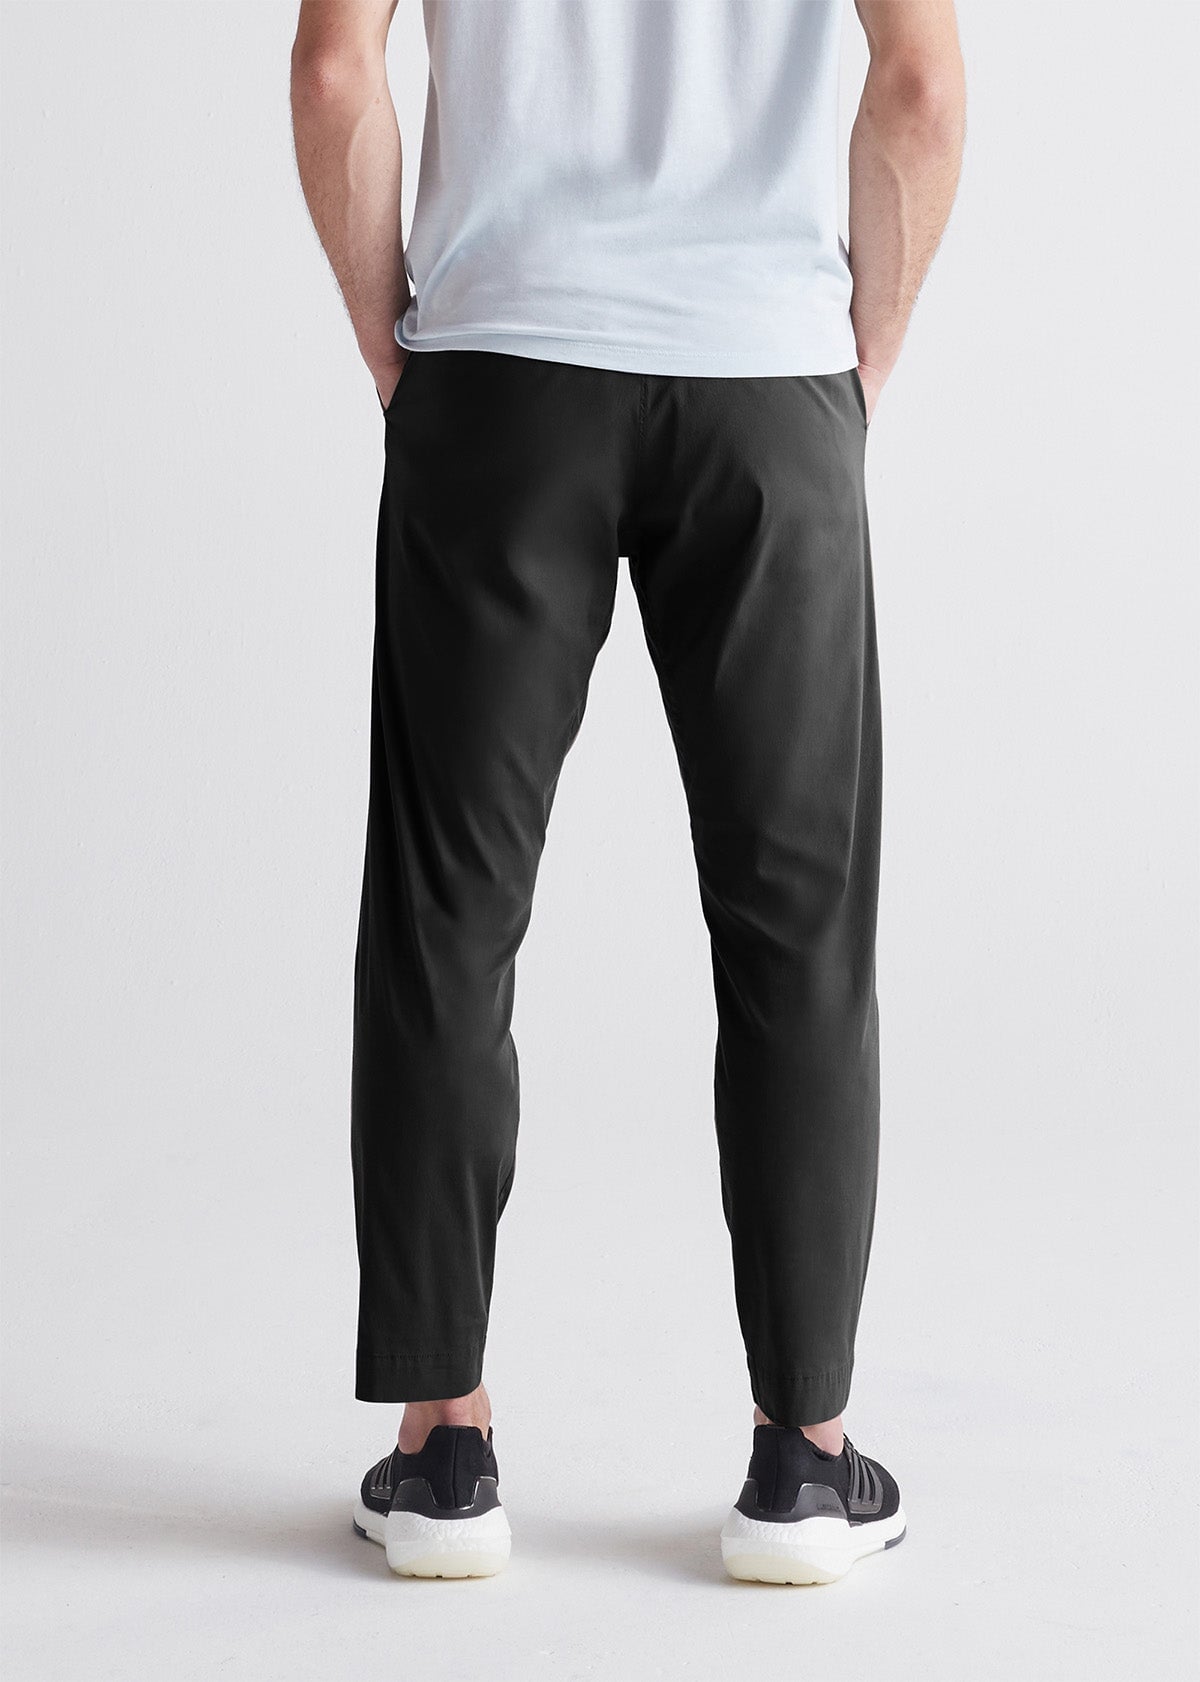 Lululemon Commission Pant Relaxed 34L, Men's Fashion, Bottoms, Trousers on  Carousell